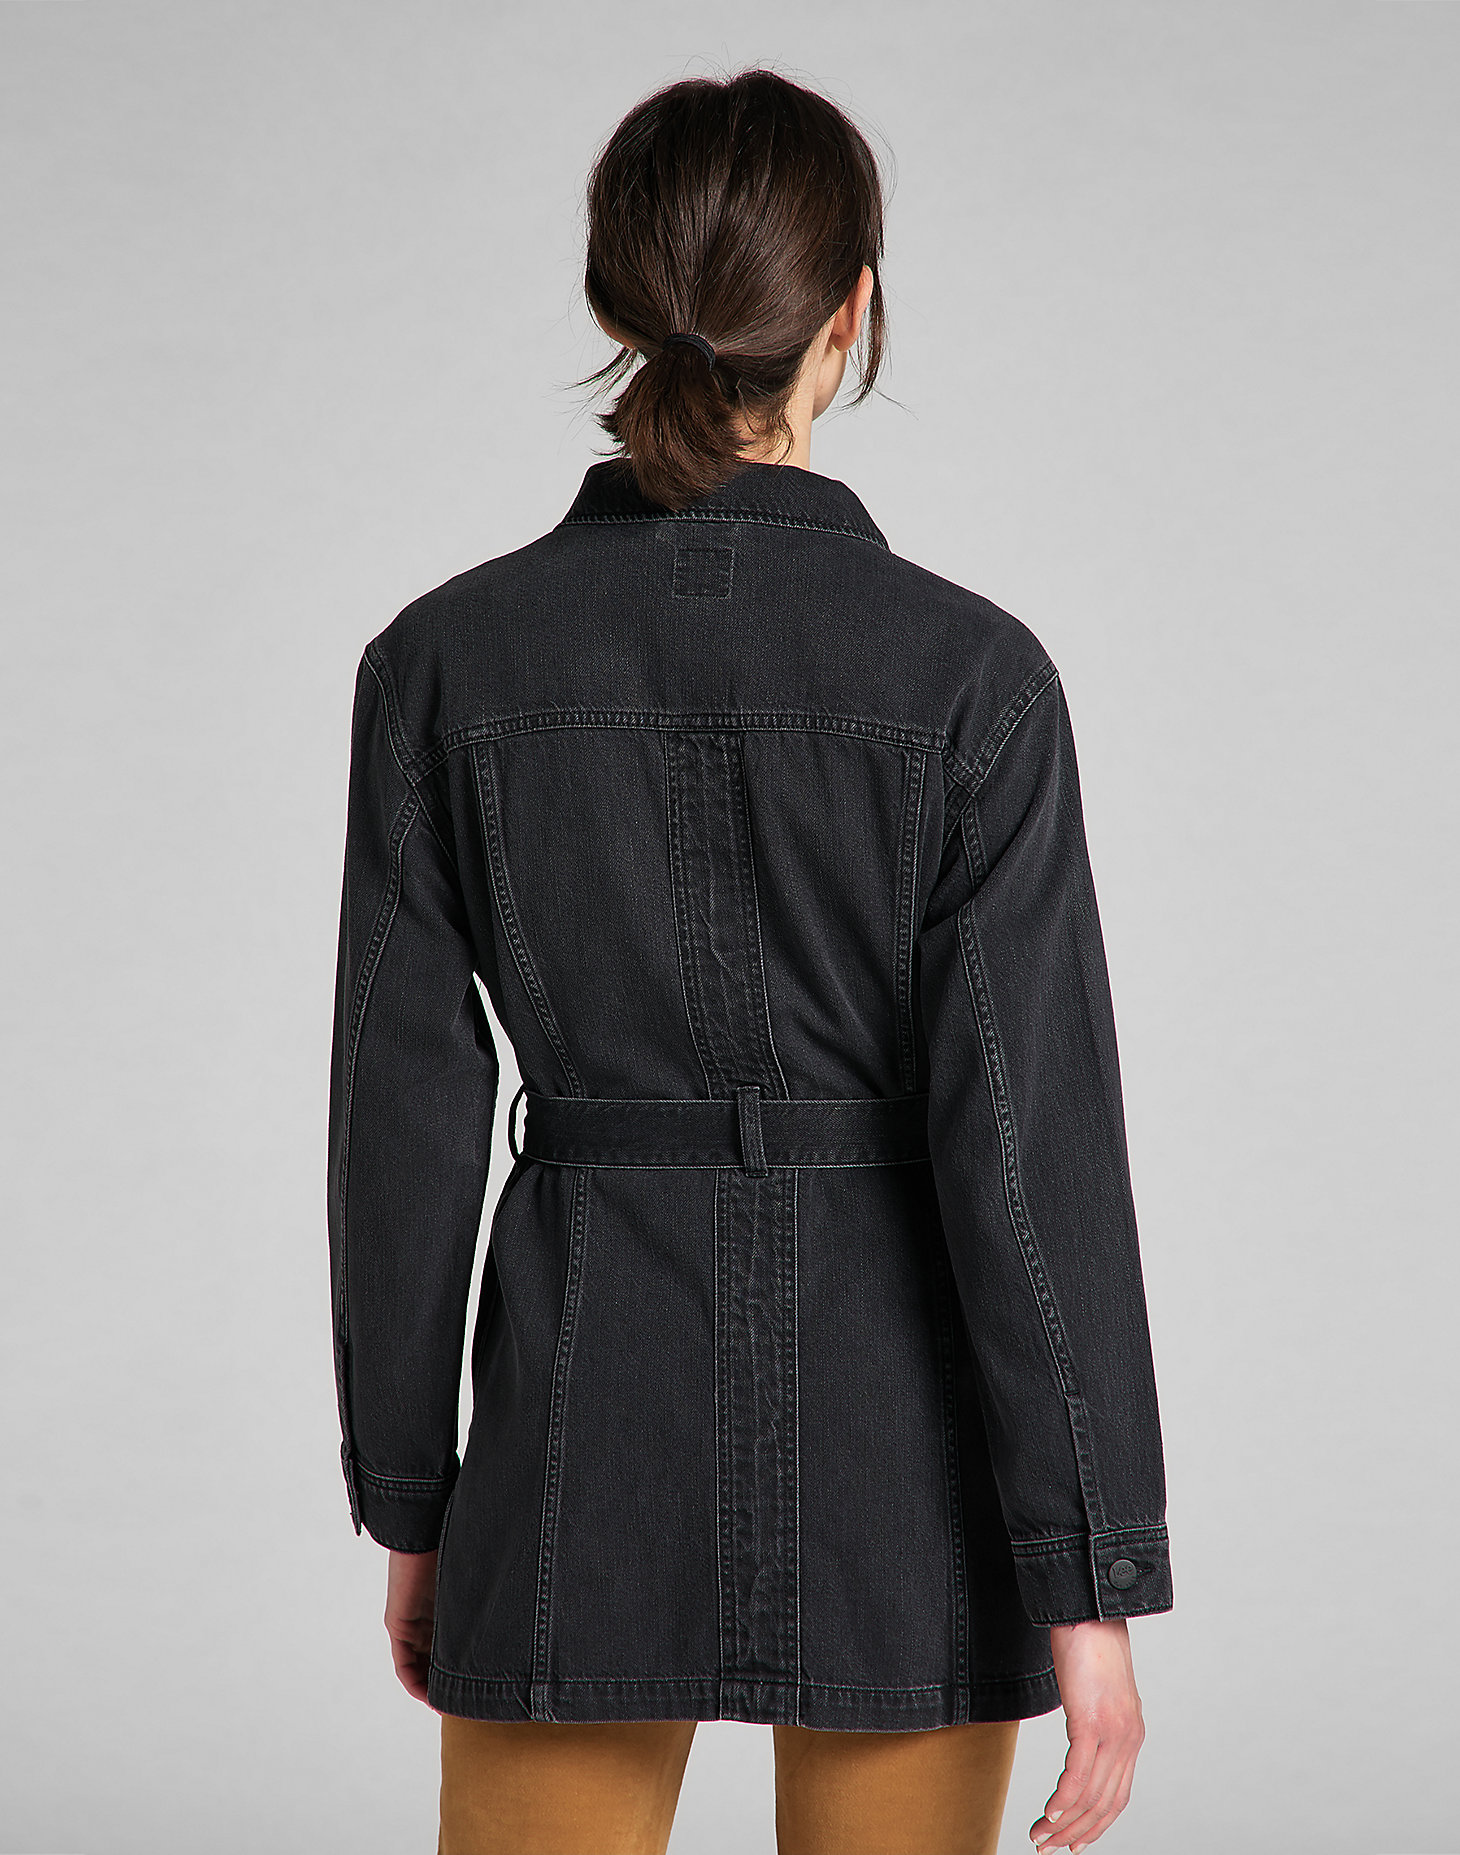 Belted Rider Jacket in Black Duns alternative view 1